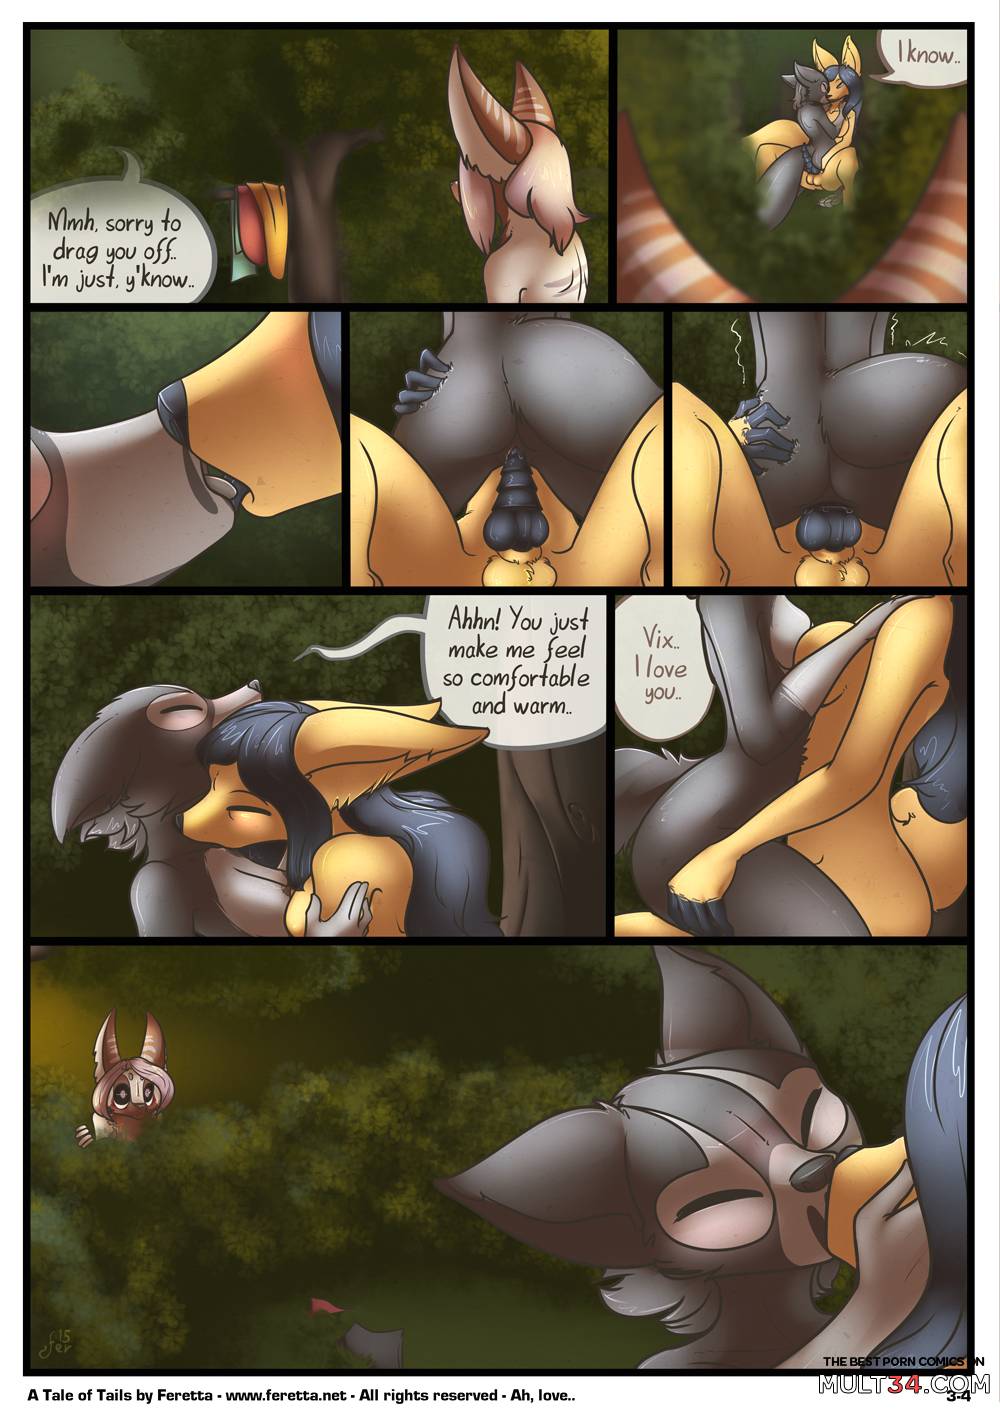 A Tale of Tails 3 page 5